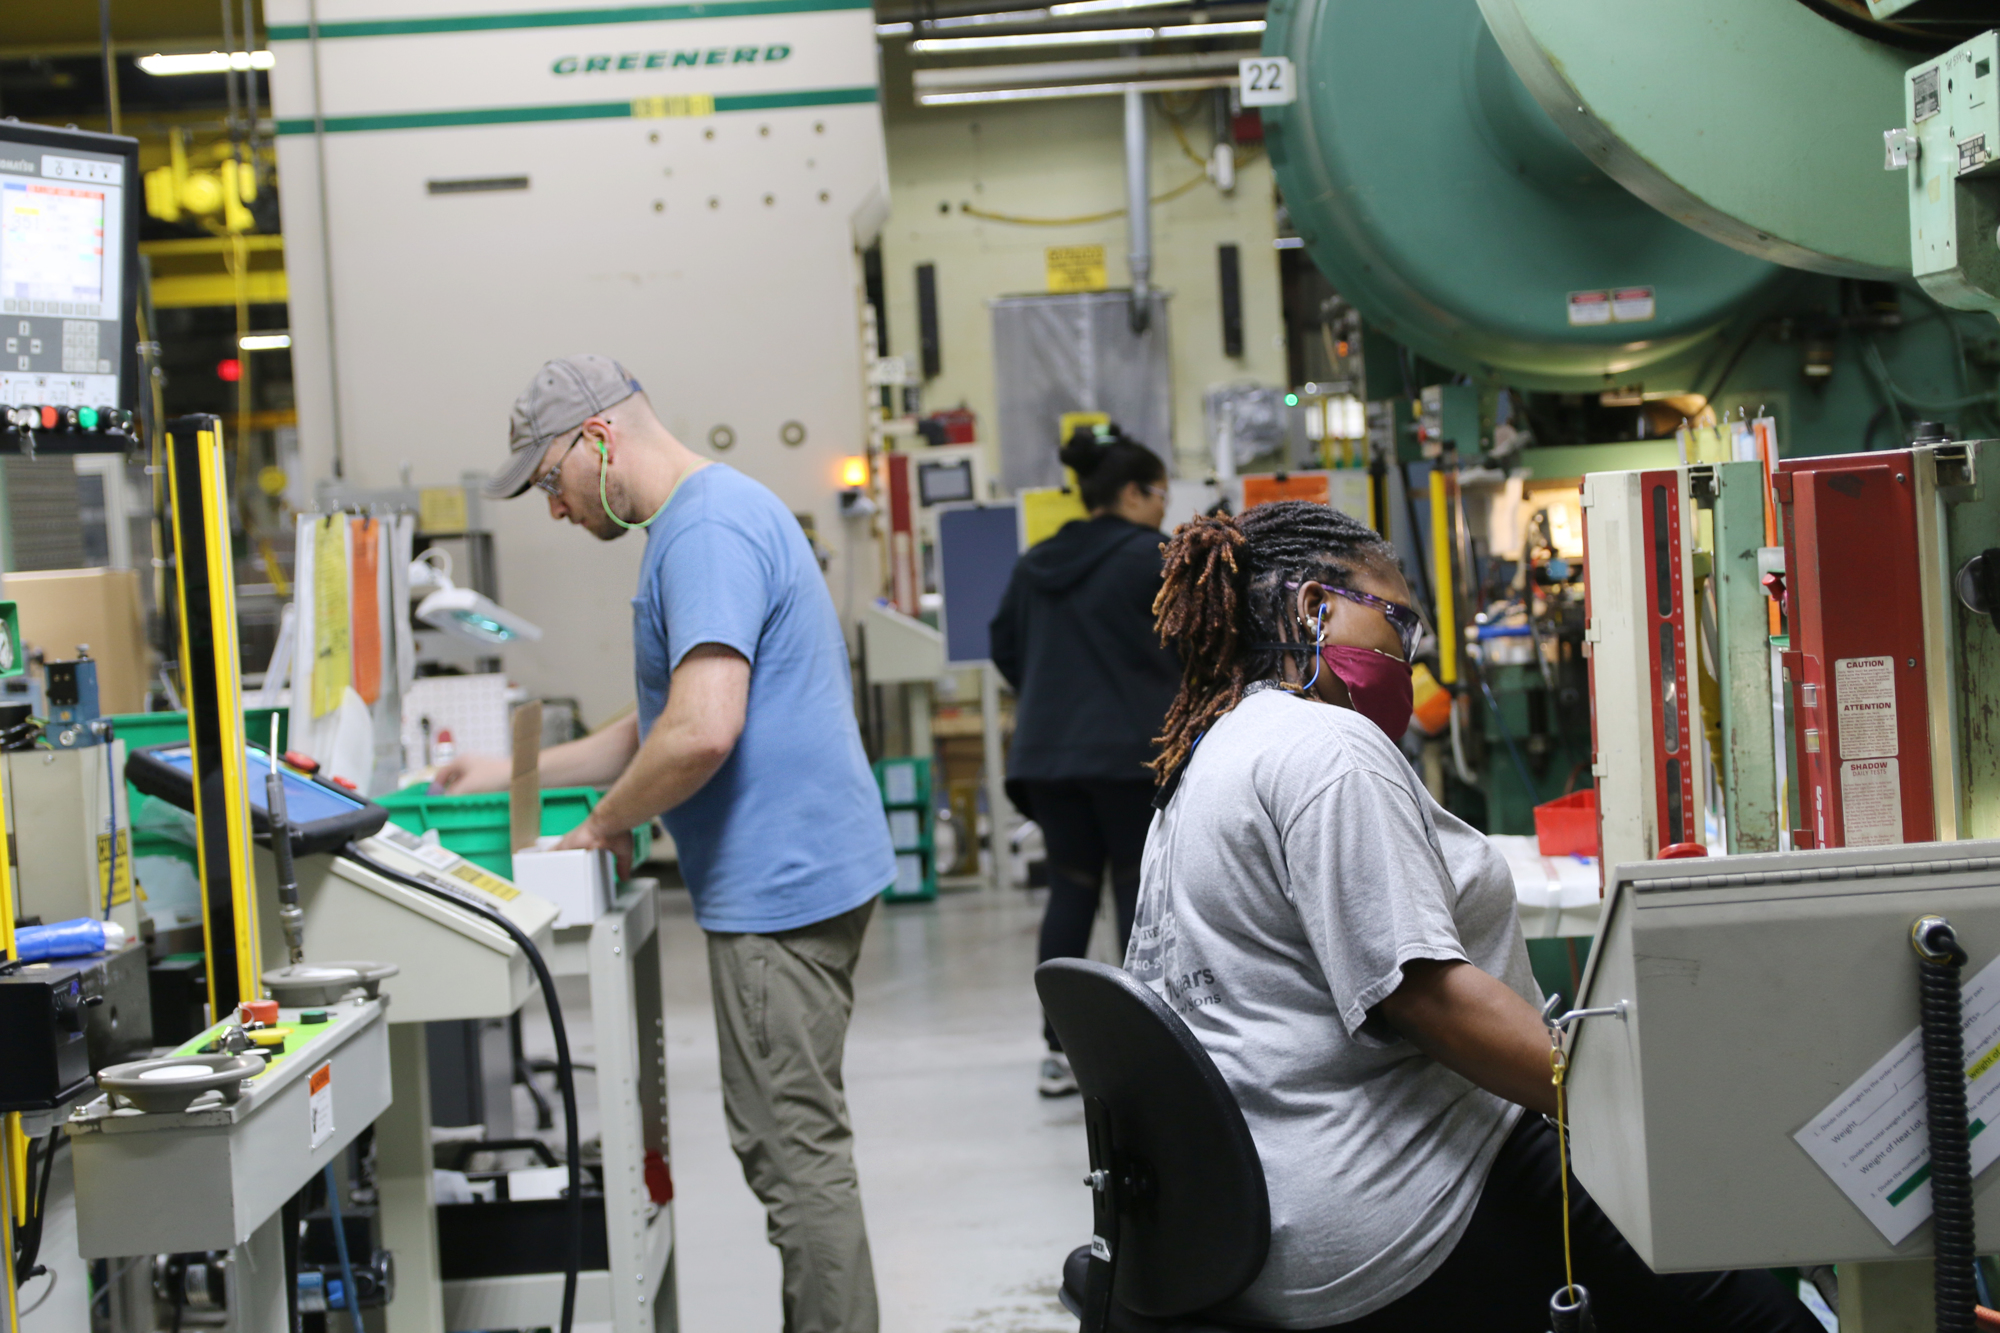 Hudson Technology employees work inside the 110,000-square-foot facility in Ormond Beach. Photo by Jarleene Almenas